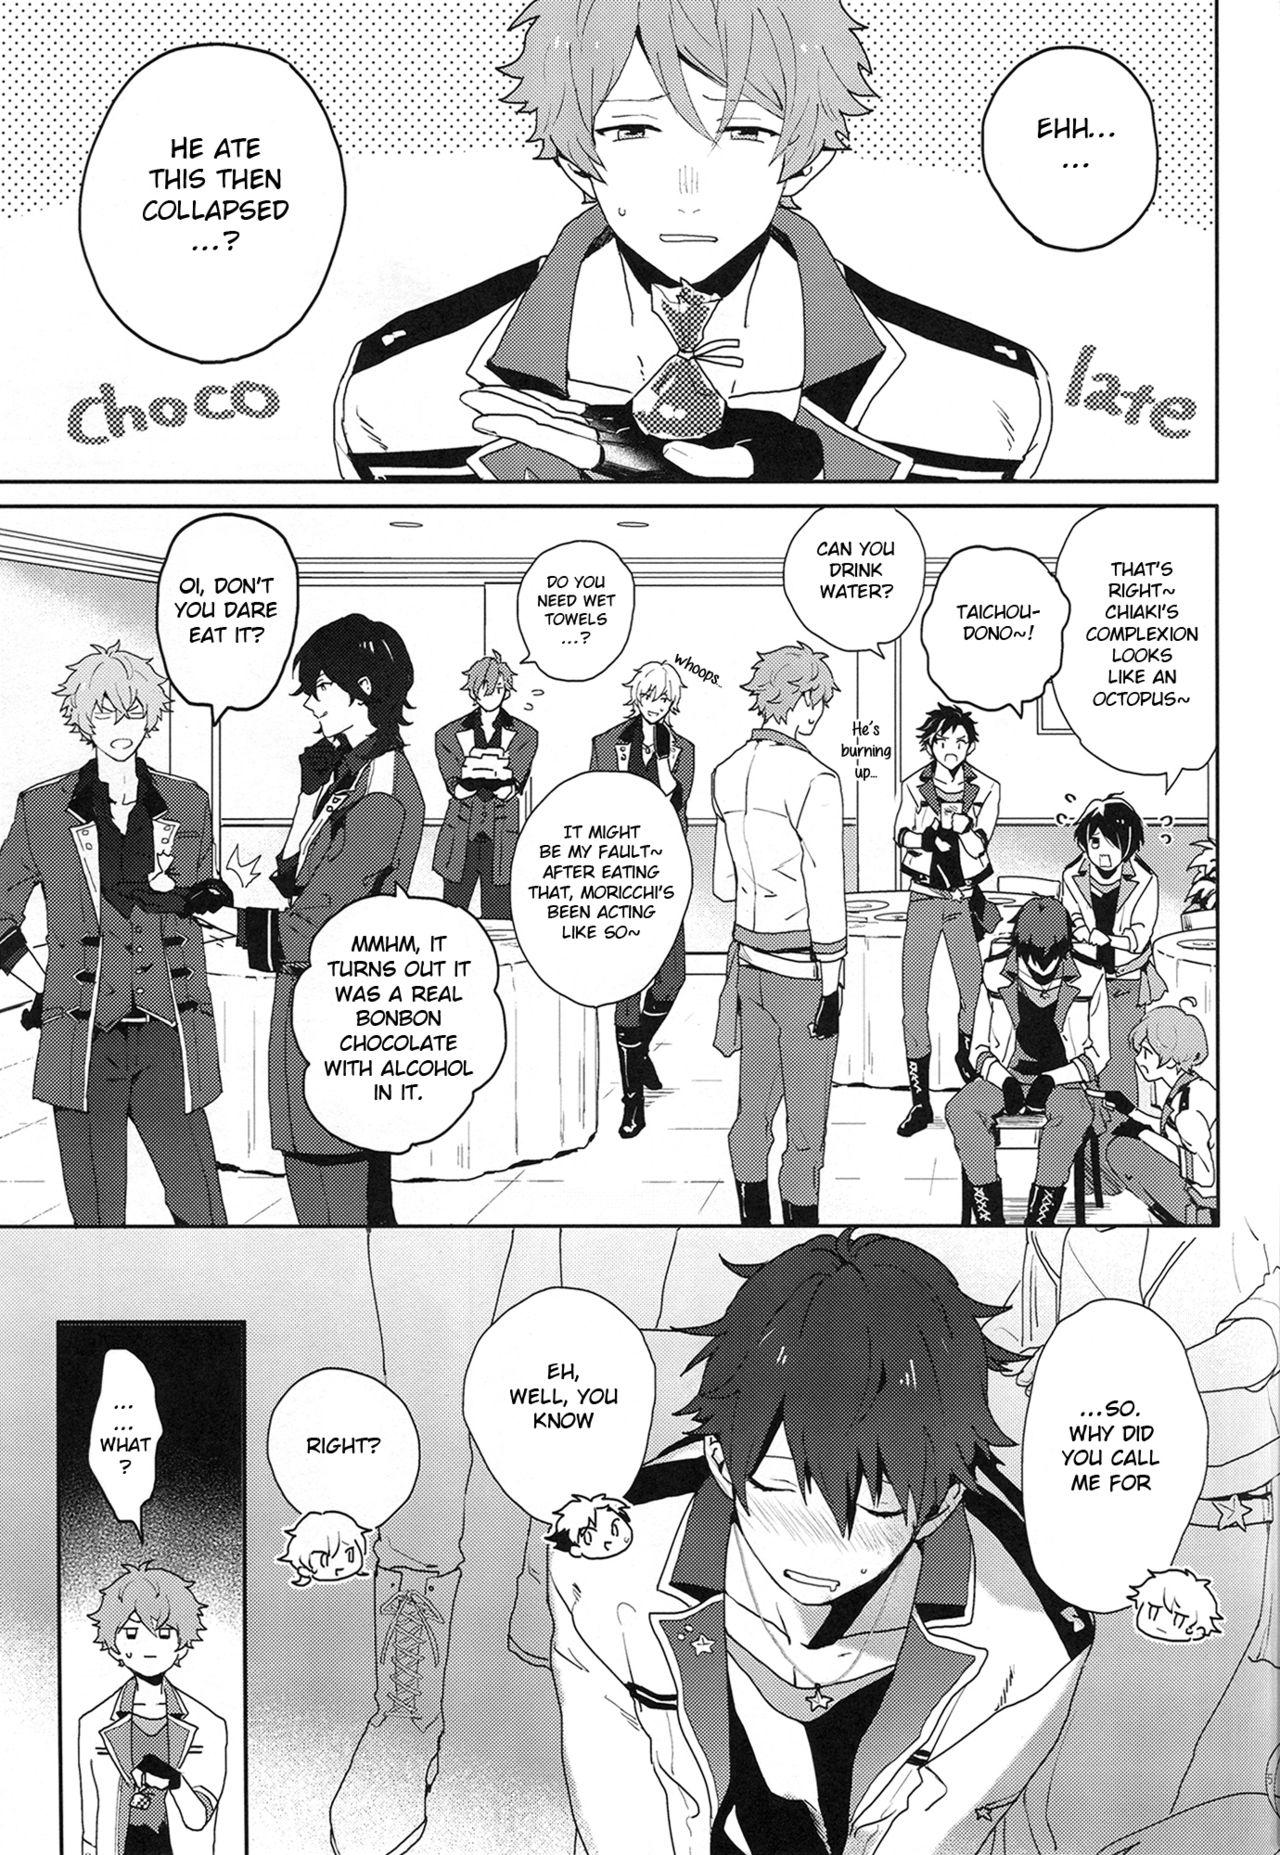 Blowjobs After the Holiday Party! - Ensemble stars Tanned - Page 5